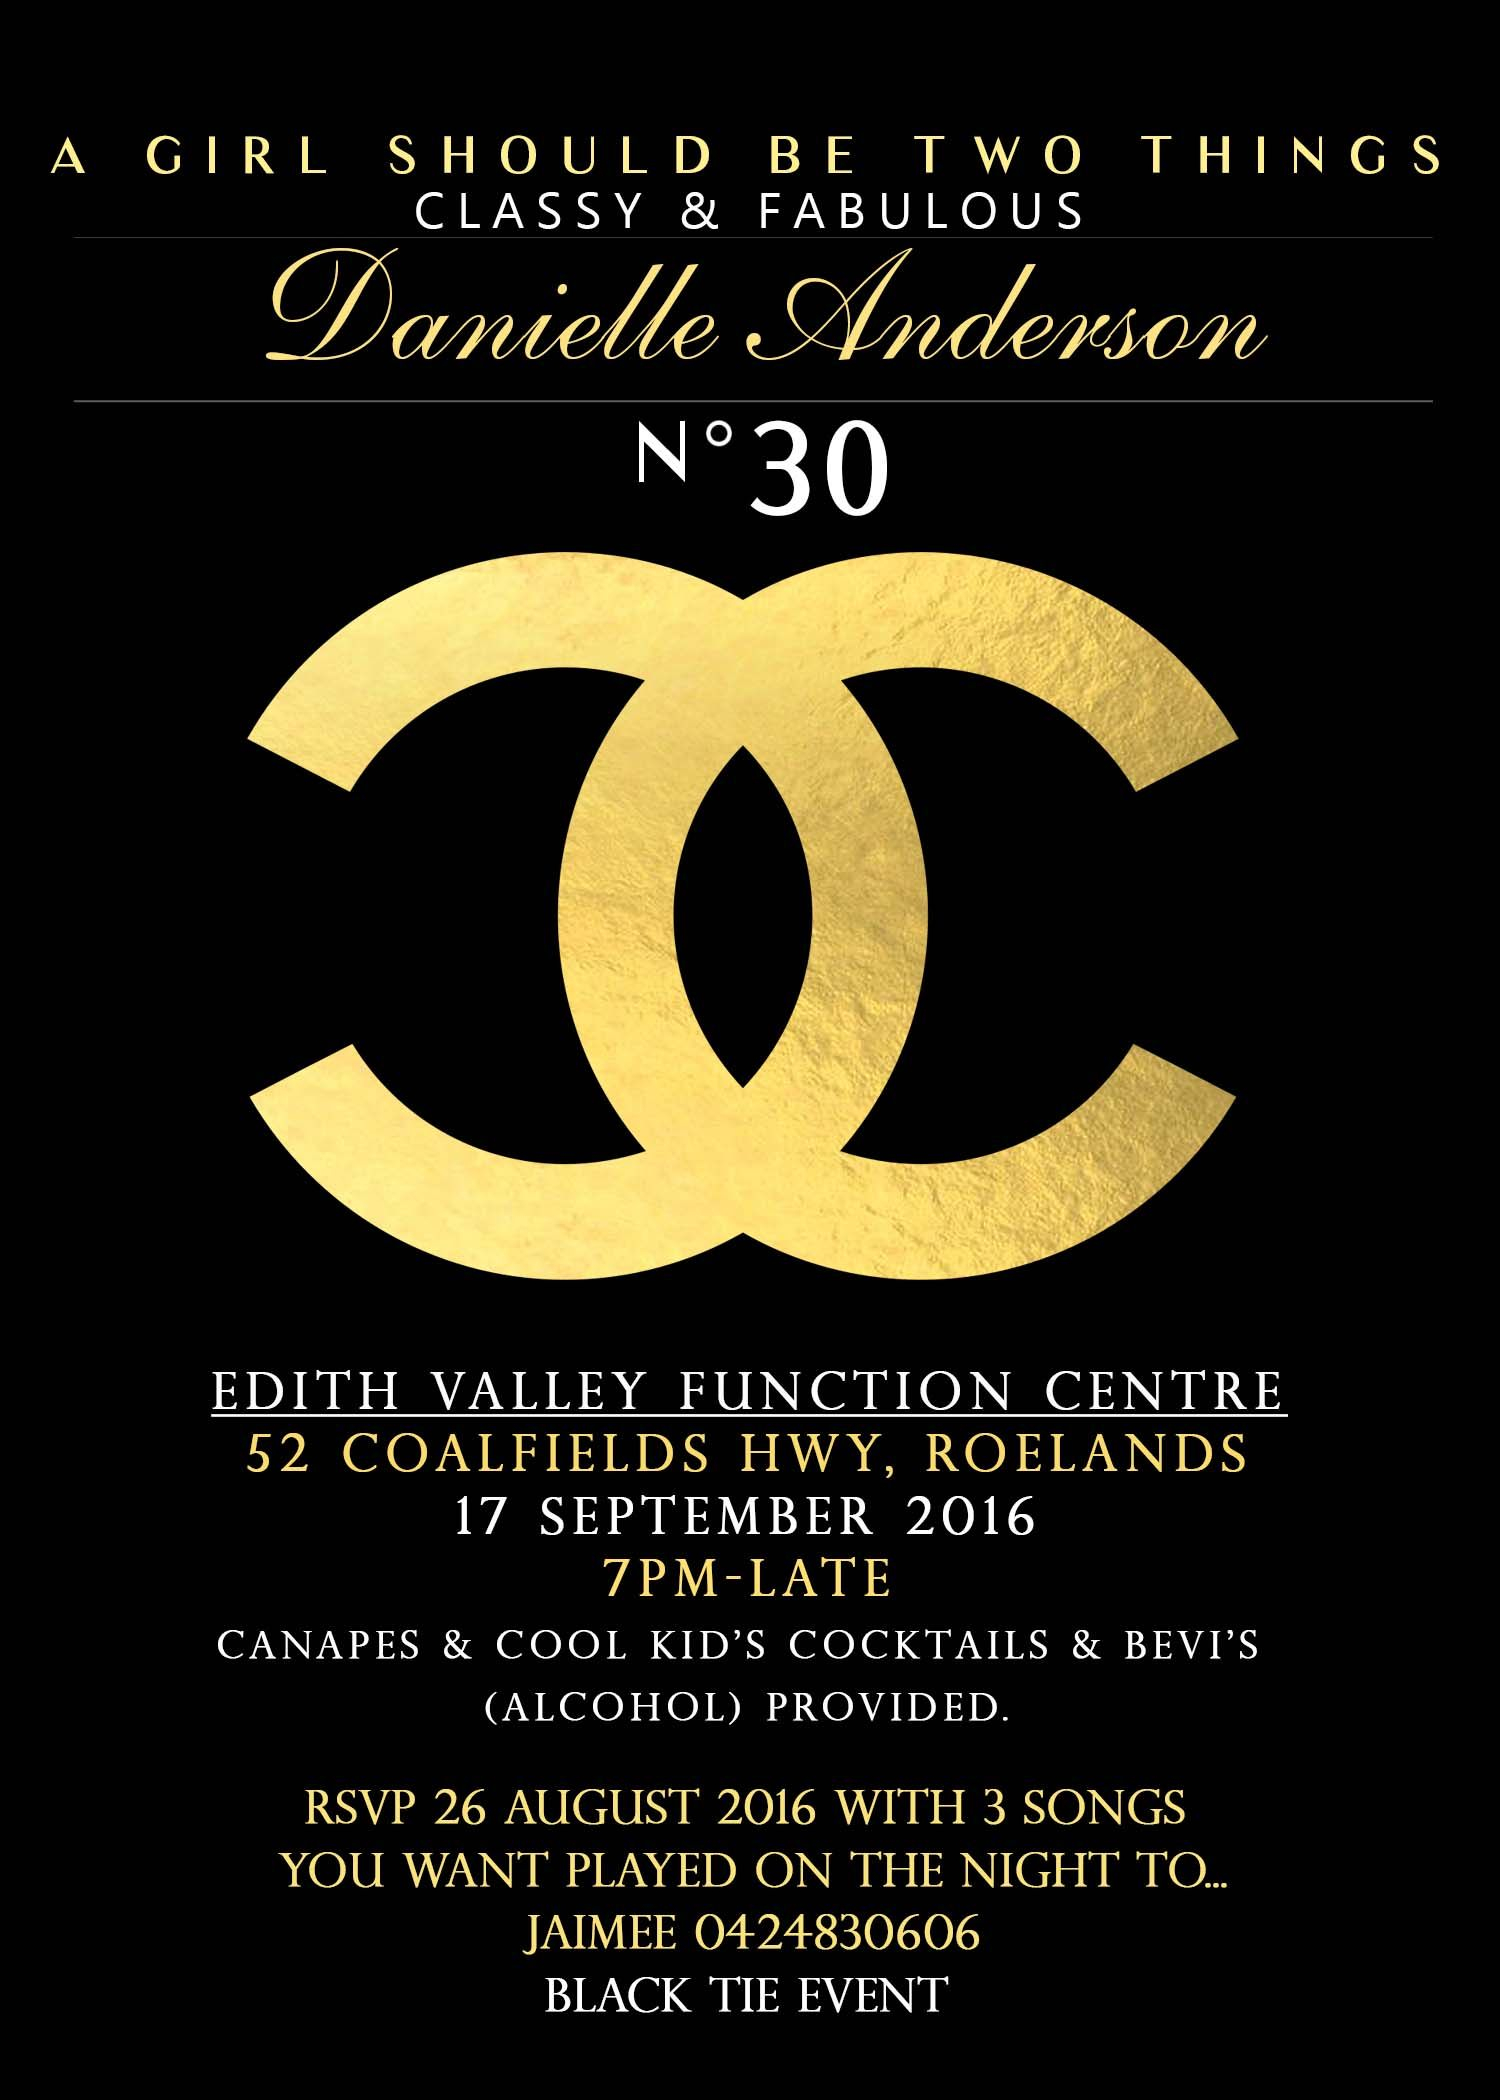 chanel-party-invitation-template-business-template-ideas